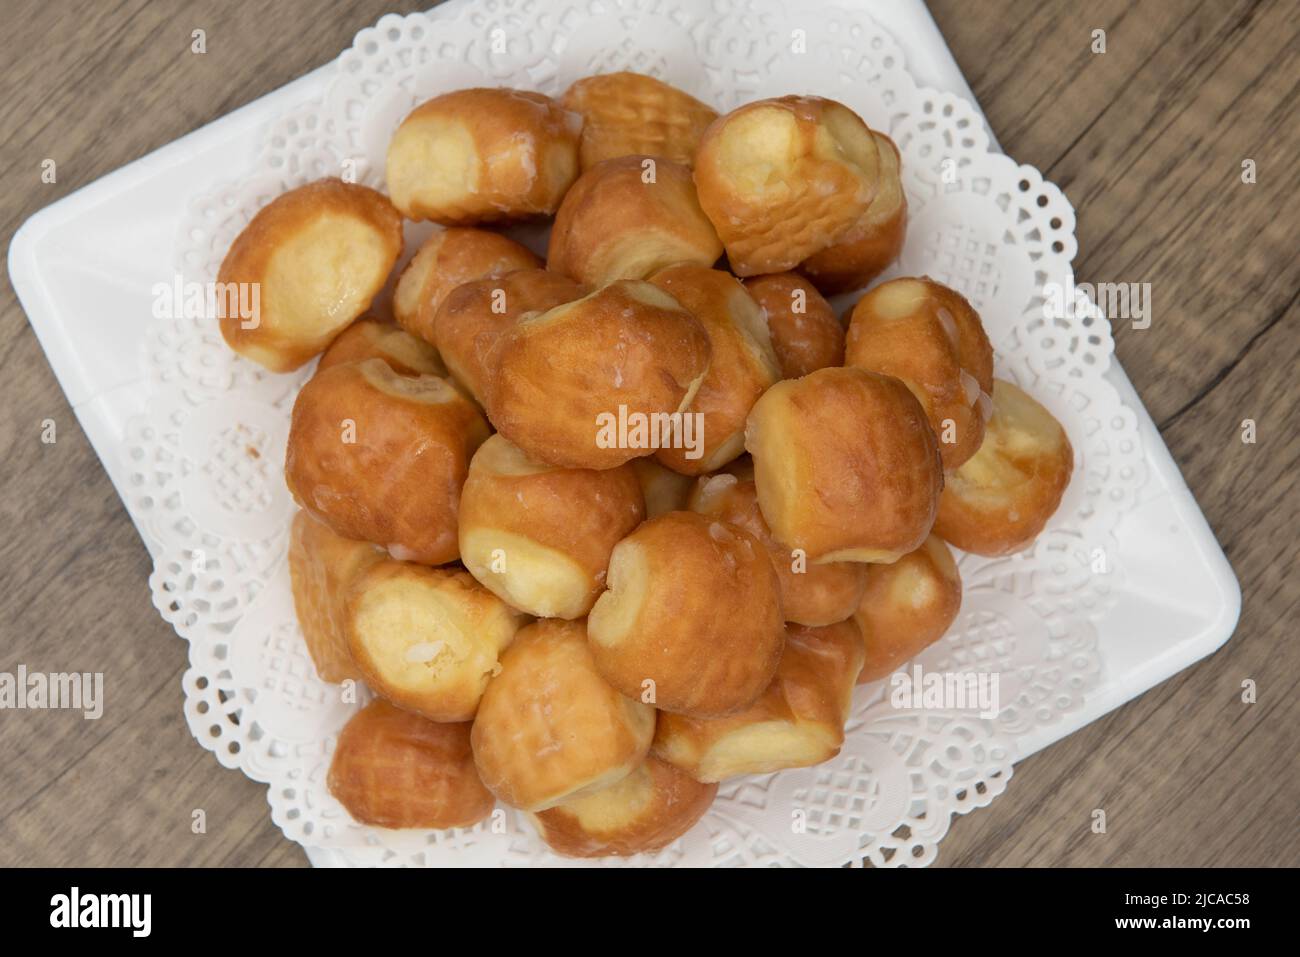 Overhead view of tempting fresh from the oven glazed donut holes from the bakery stacked on a plate. Stock Photo